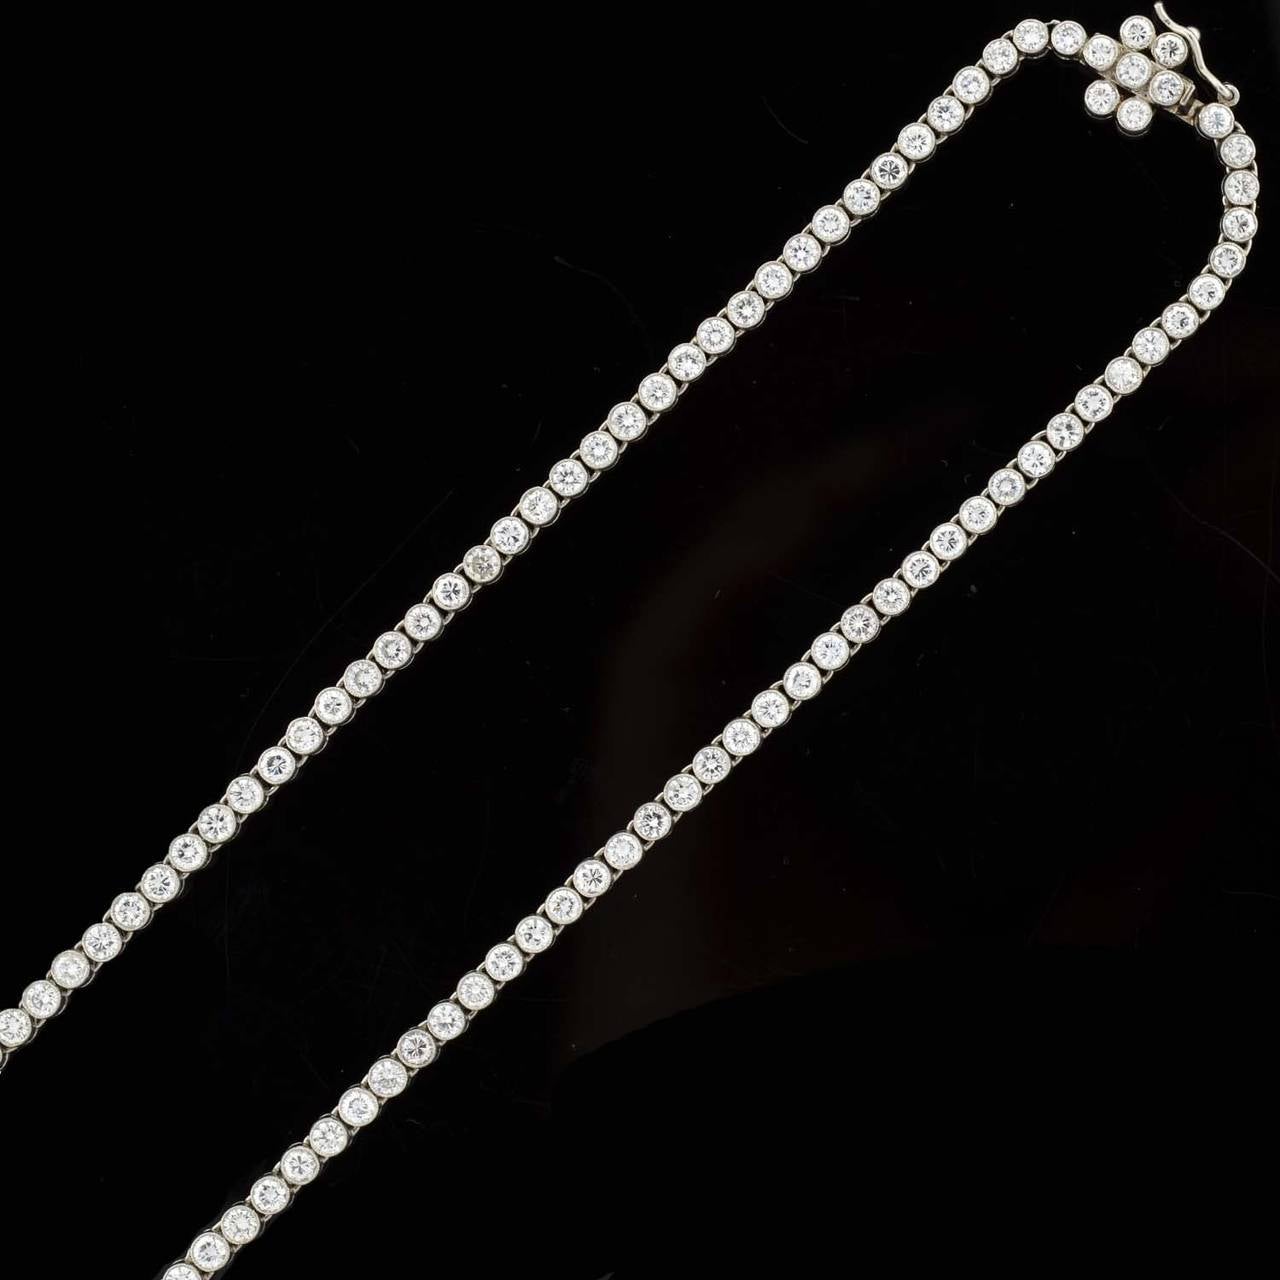 An exquisite Riviera diamond necklace! Made of platinum, this beautiful necklace has 122 graduating Brilliant Cut diamond stones which are set within a milgrained bezel setting. The diamonds are hinged together, allowing for beautiful movement when